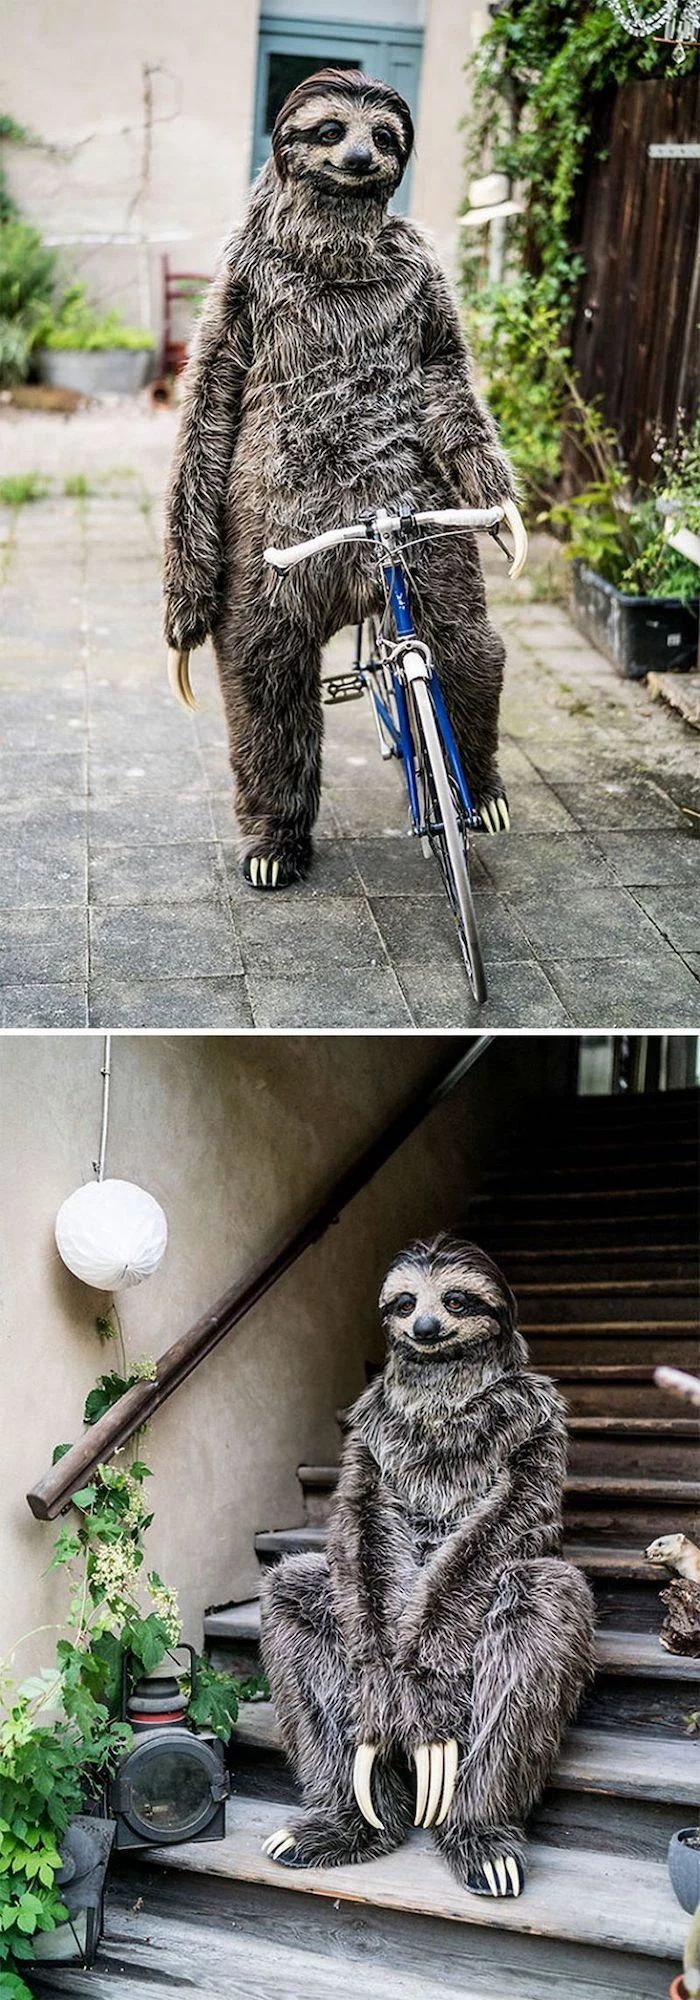 man in a sloth costume, riding a bike, sitting on stairs, what should i be for halloween, side by side photos